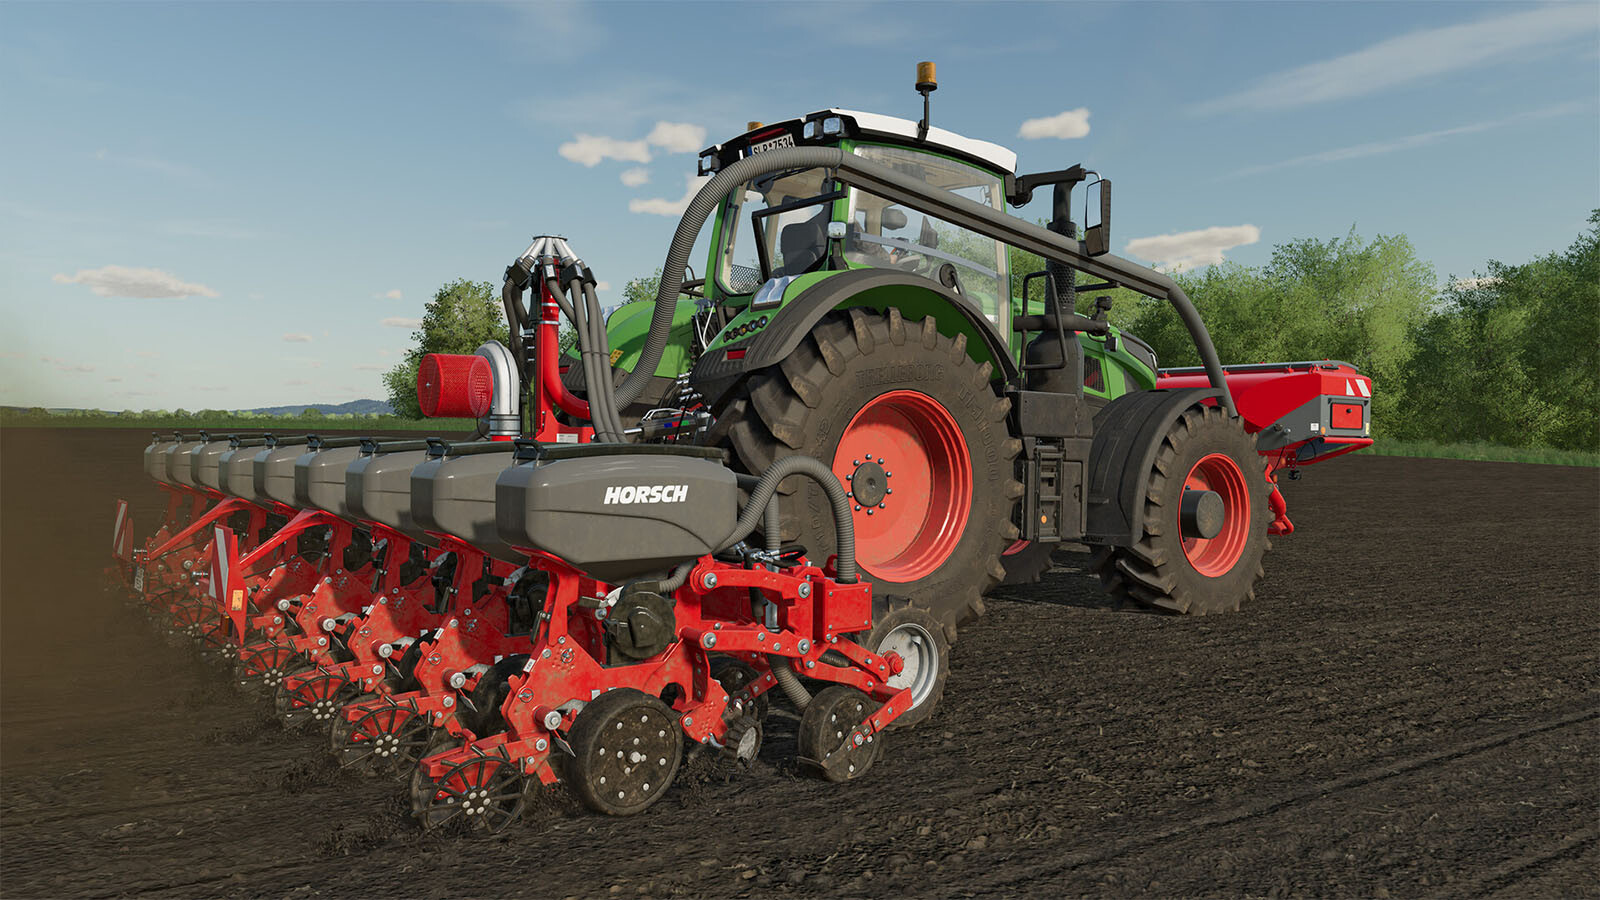 Farming Simulator 22 - OXBO Pack Steam Key for PC and Mac - Buy now